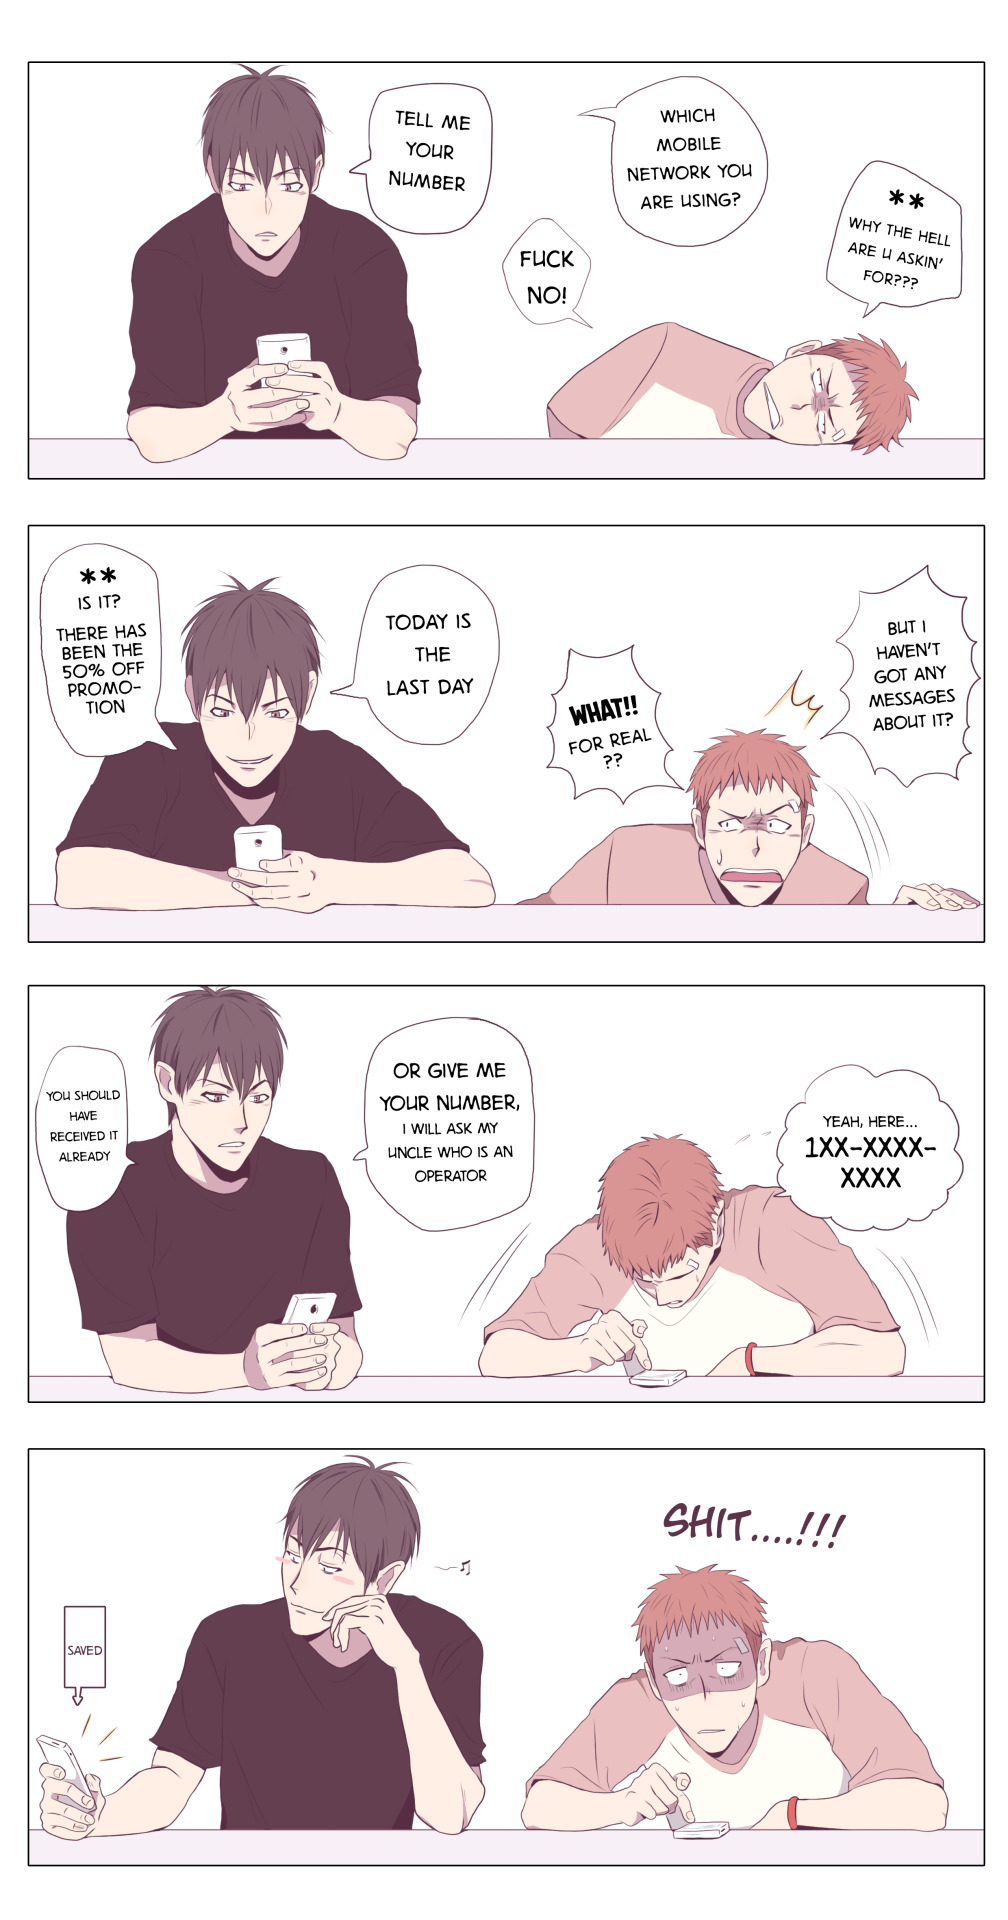 elsie-drawing:  My headcanon of How He Tian has Delinquent’s phone number /p&gt;